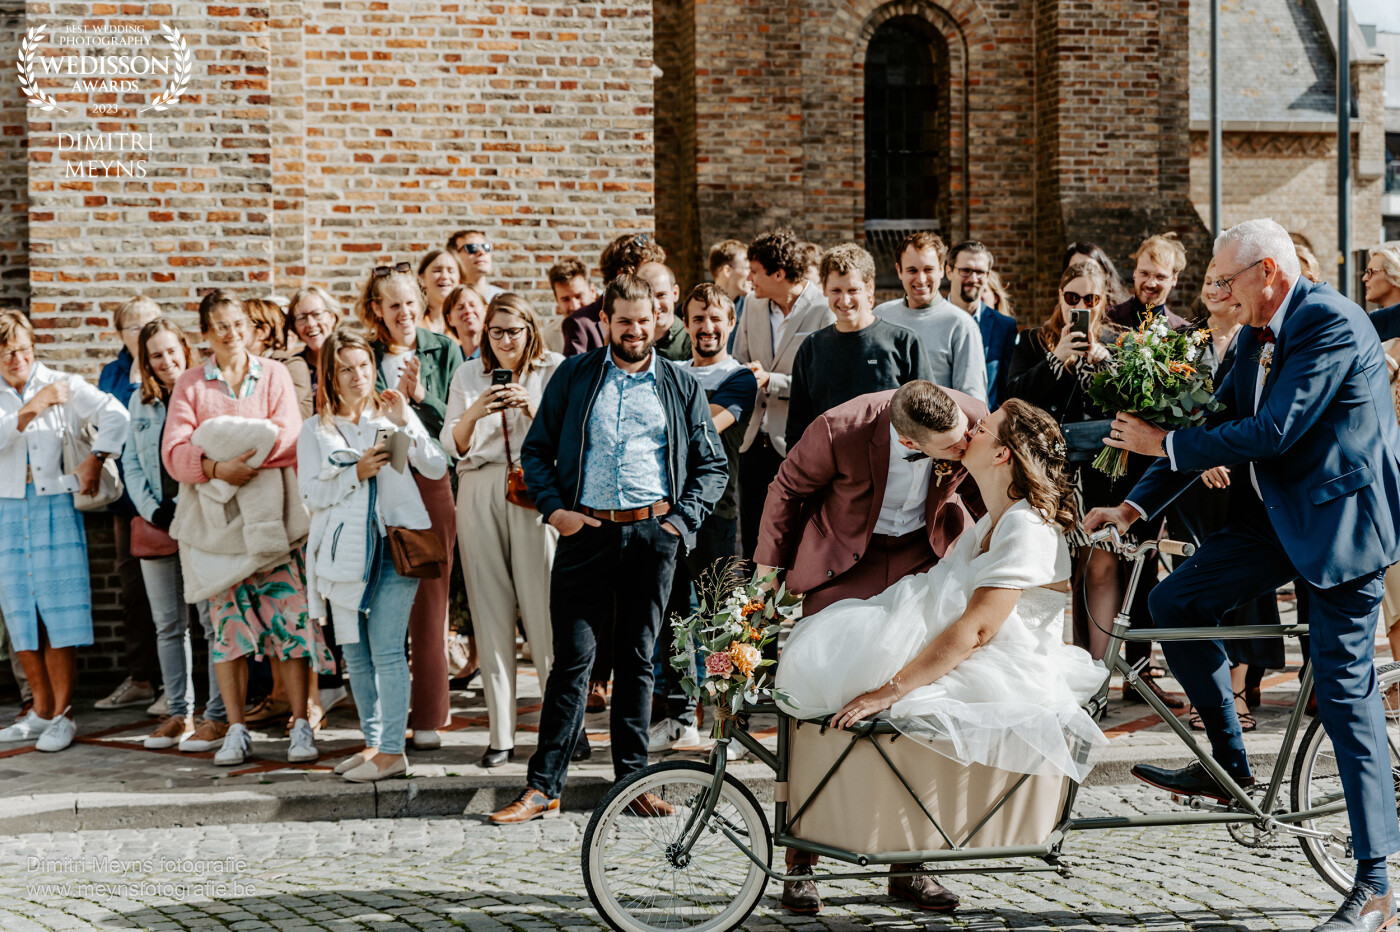 Arrive at the church in style. In any case, the eyes were focused on them and the necessary photos or videos were made. A successful day for Marijn and Sien.